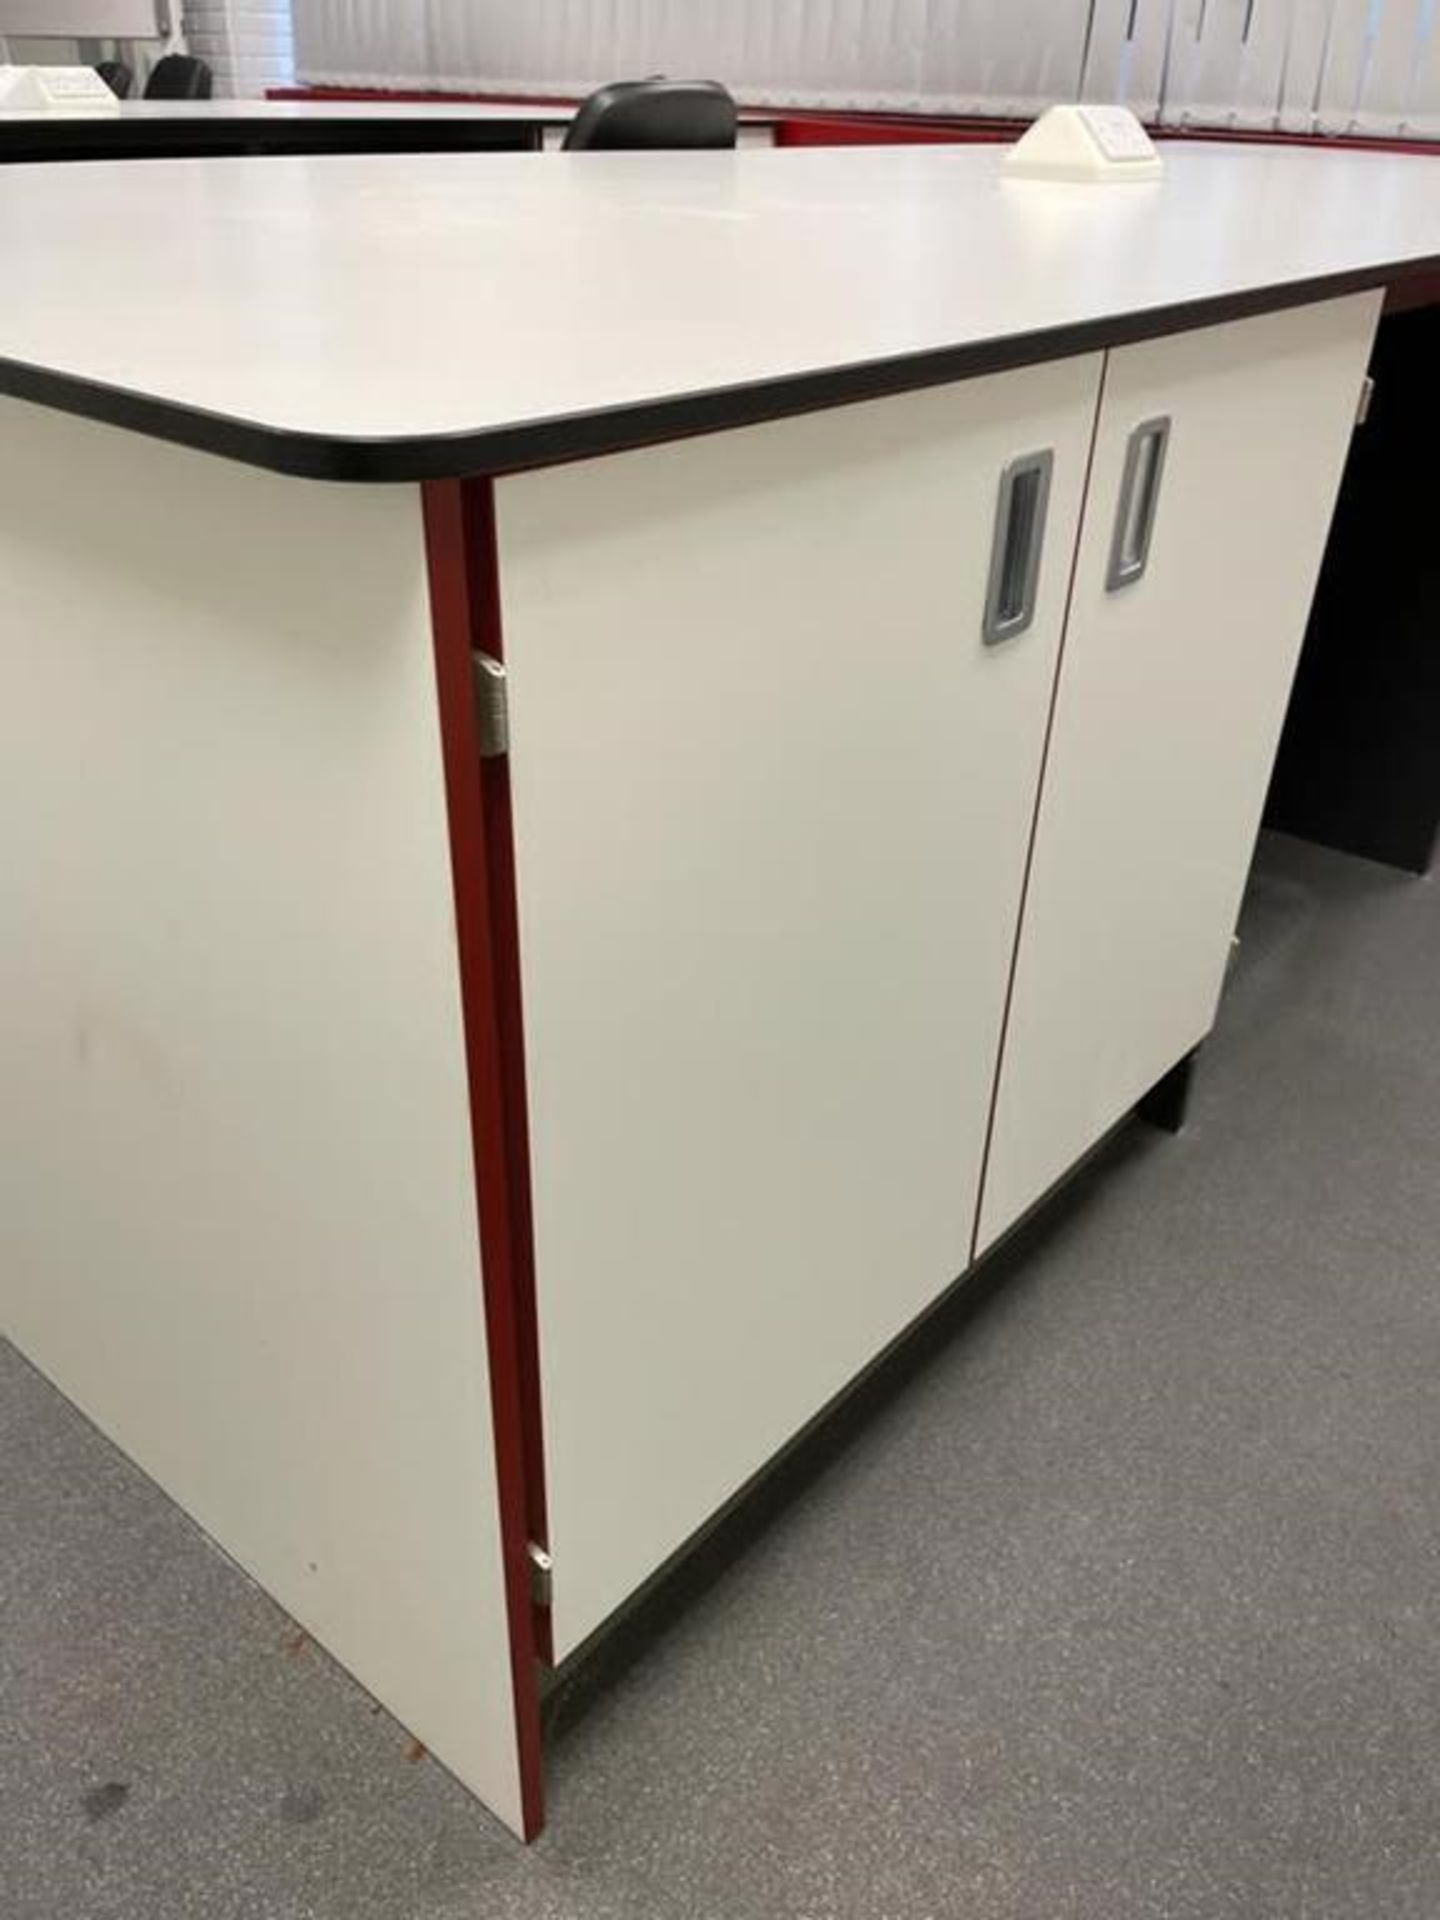 Fitted Laboratory furniture circa 2018. - Image 8 of 9